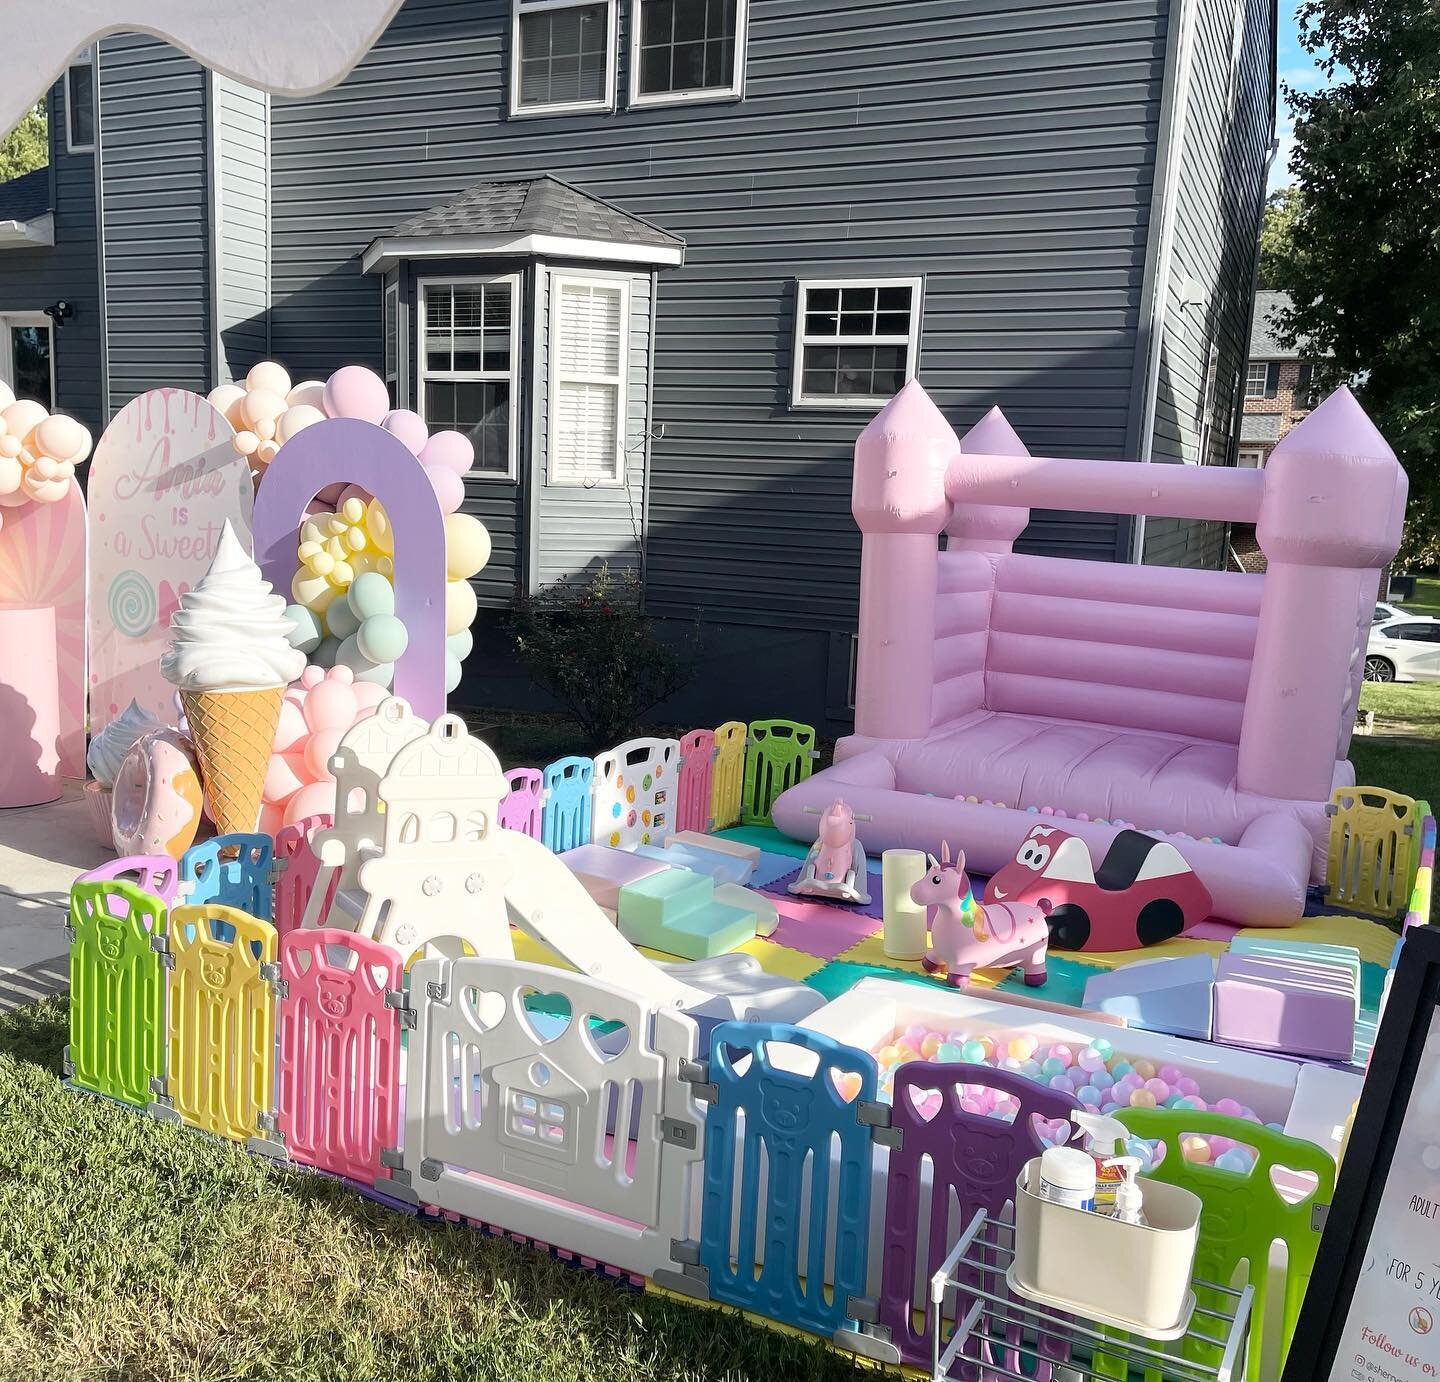 🇺🇸Our Pastel colors package is super popular for girls, we have different sizes and it&rsquo;s perfect for outdoor and indoor installation, you can book it www.sherryspartydesign.com or on our link in our bio

🇻🇪 Nuestros paquete de colores paste